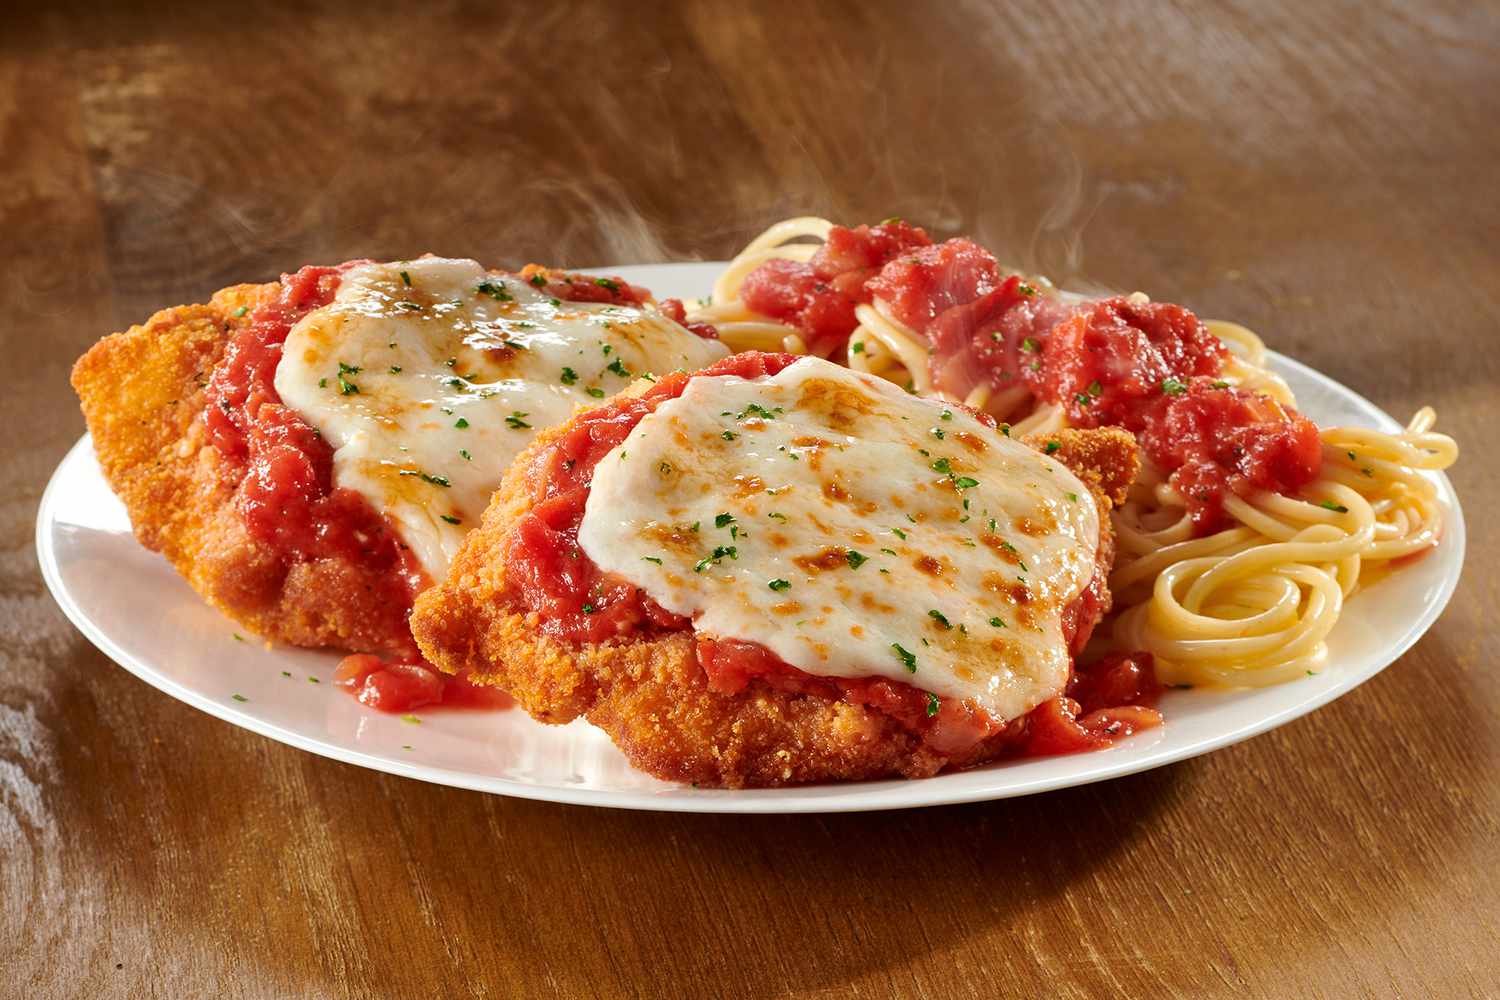 Olive Garden Has Recipes For Its Famous Recipes You Can Make At